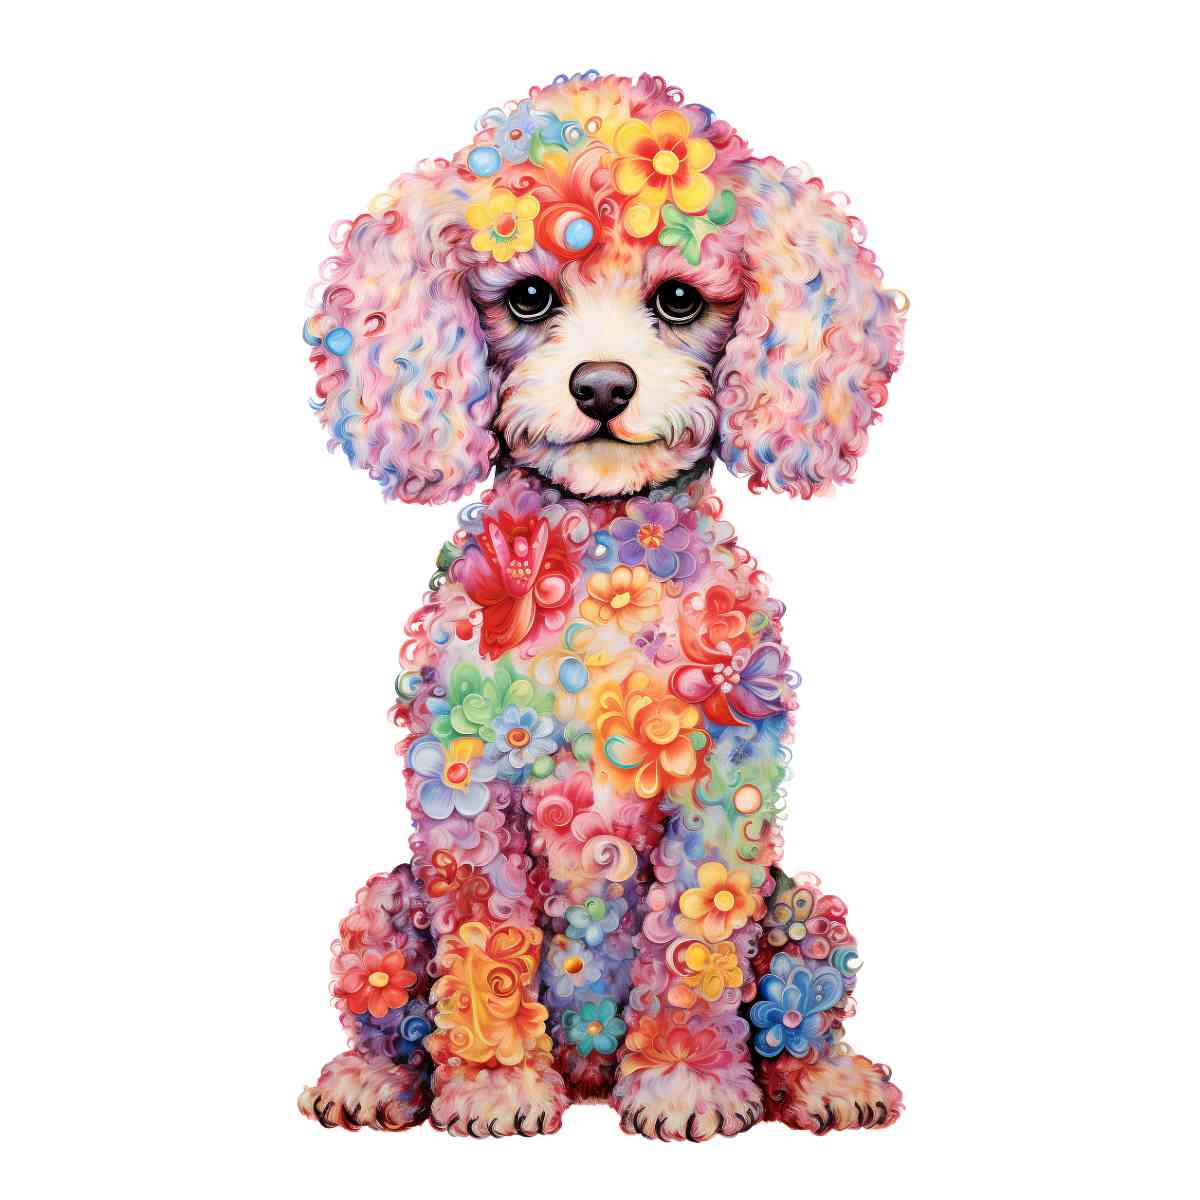 Animal Jigsaw Puzzle > Wooden Jigsaw Puzzle > Jigsaw Puzzle A3 Poodle Dog - Jigsaw Puzzle